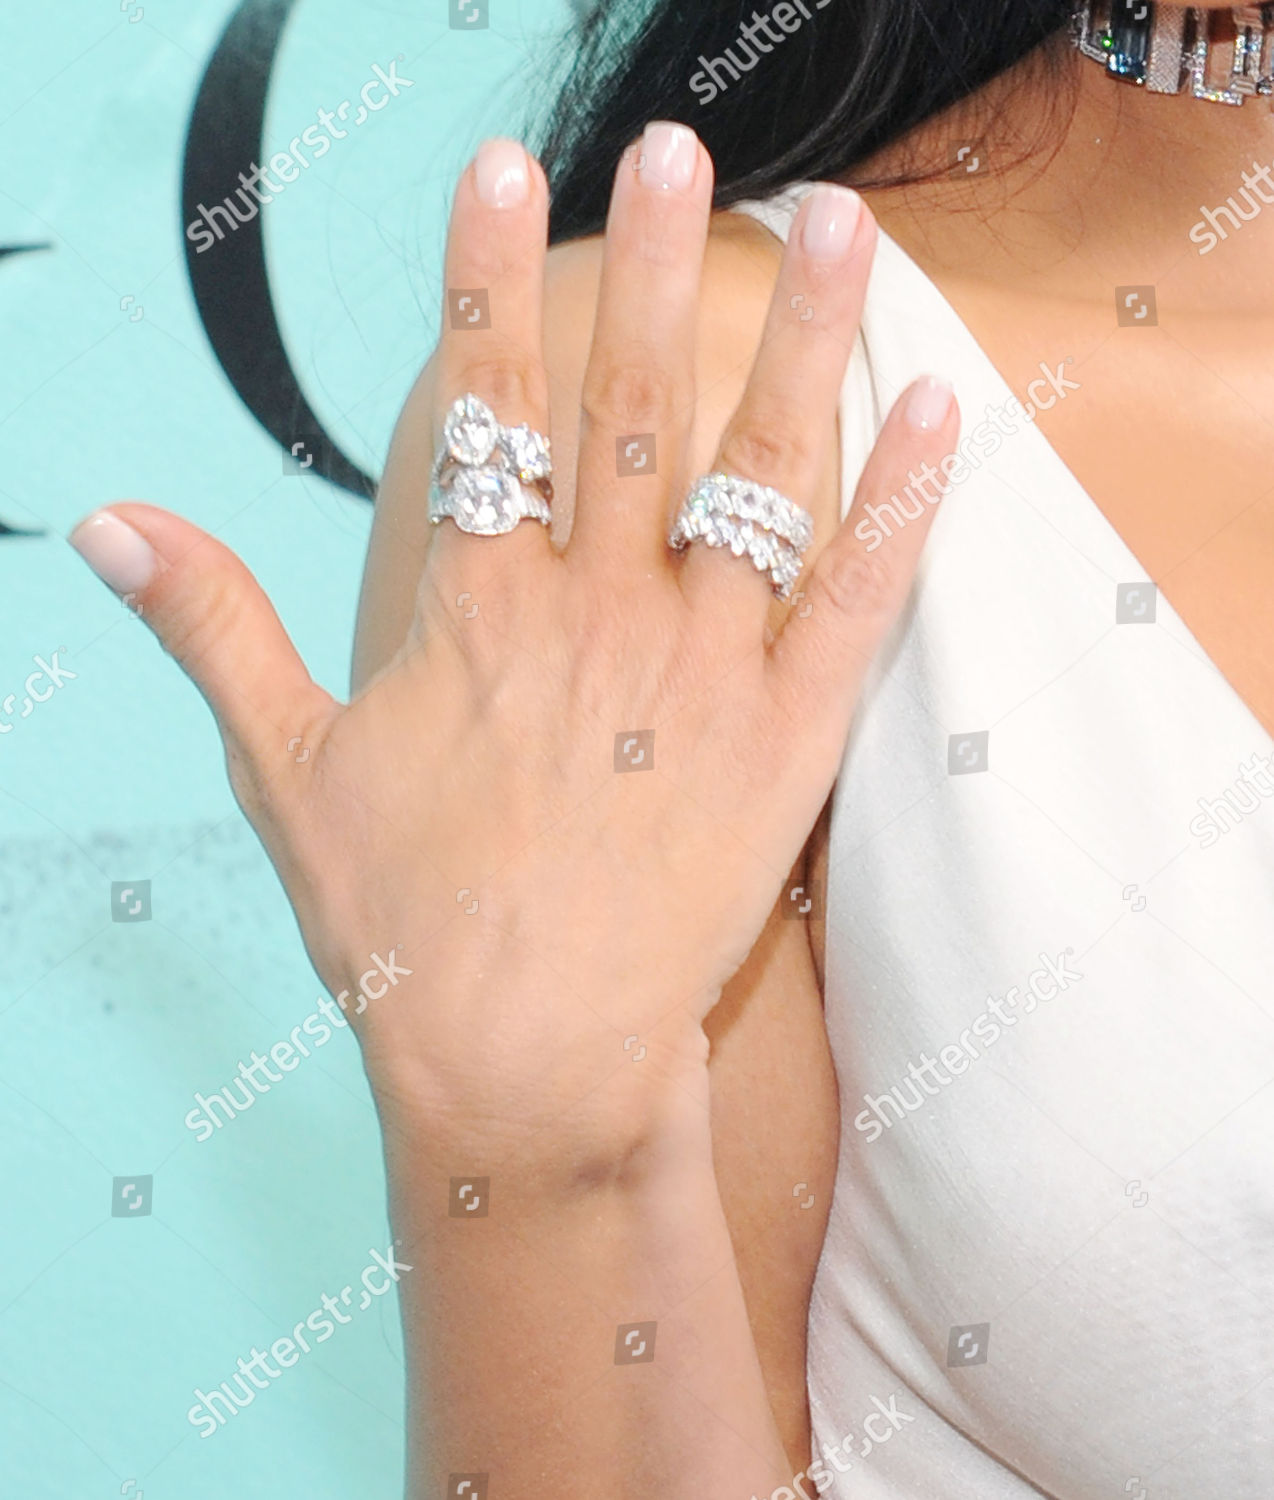 10 Celebrities Who Rock Pinky Rings – Fred and Far by Melody